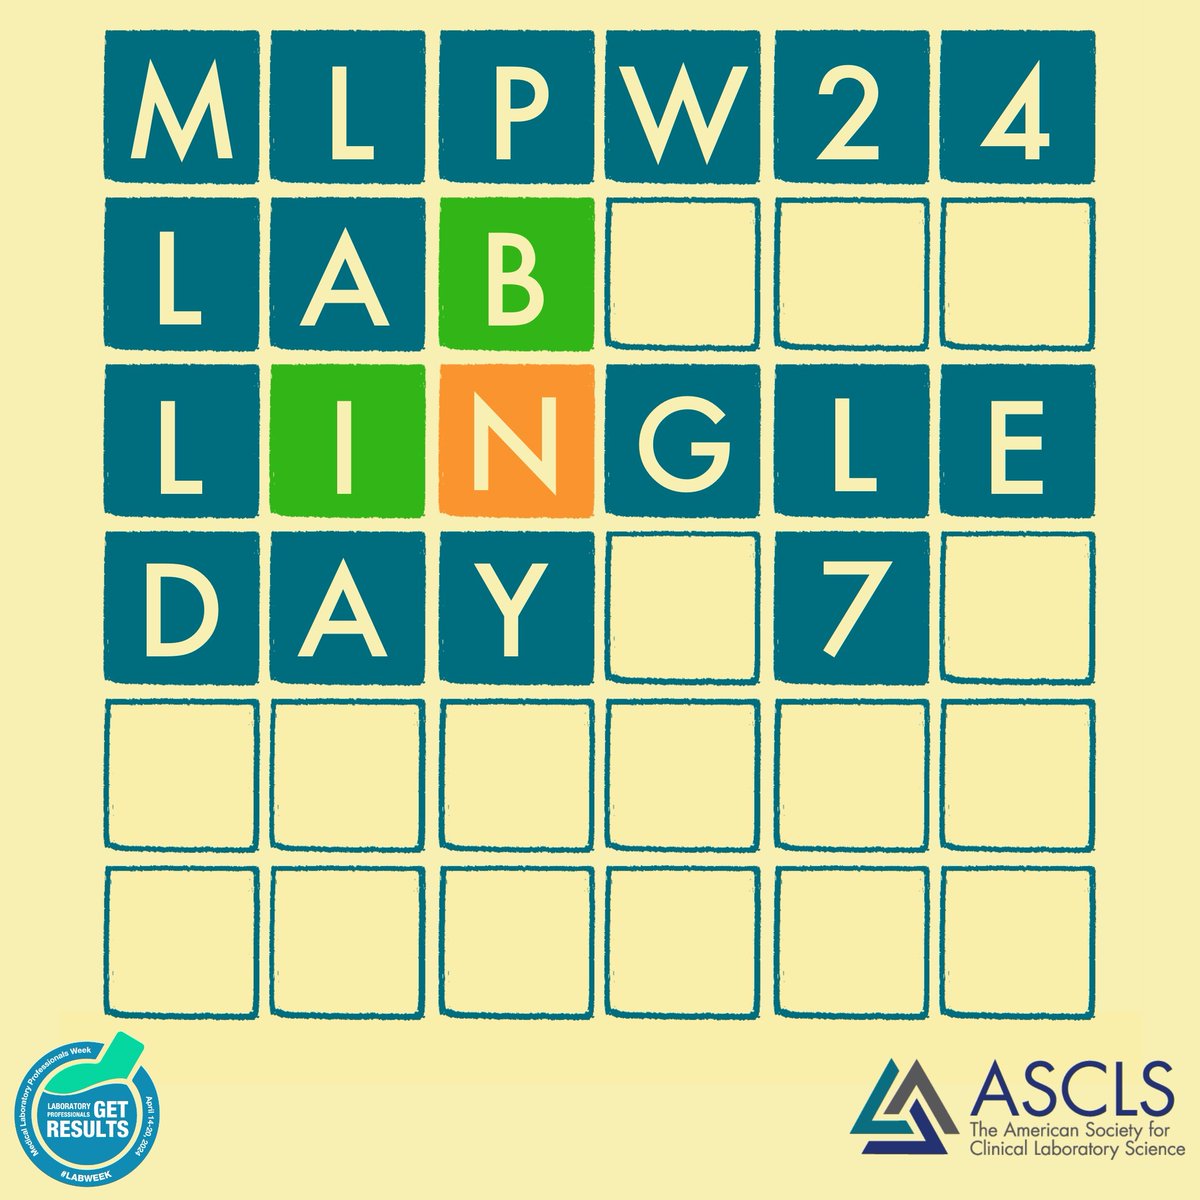 Sadly, as Medical Laboratory Professionals Week comes to an end, so do the Lab Lingles. 🥹 Try out the last two lab-themed word puzzles, and let us know how you did! #IamASCLS #LabWeek #Lab4Life
thewordfinder.com/wordle-maker/?…